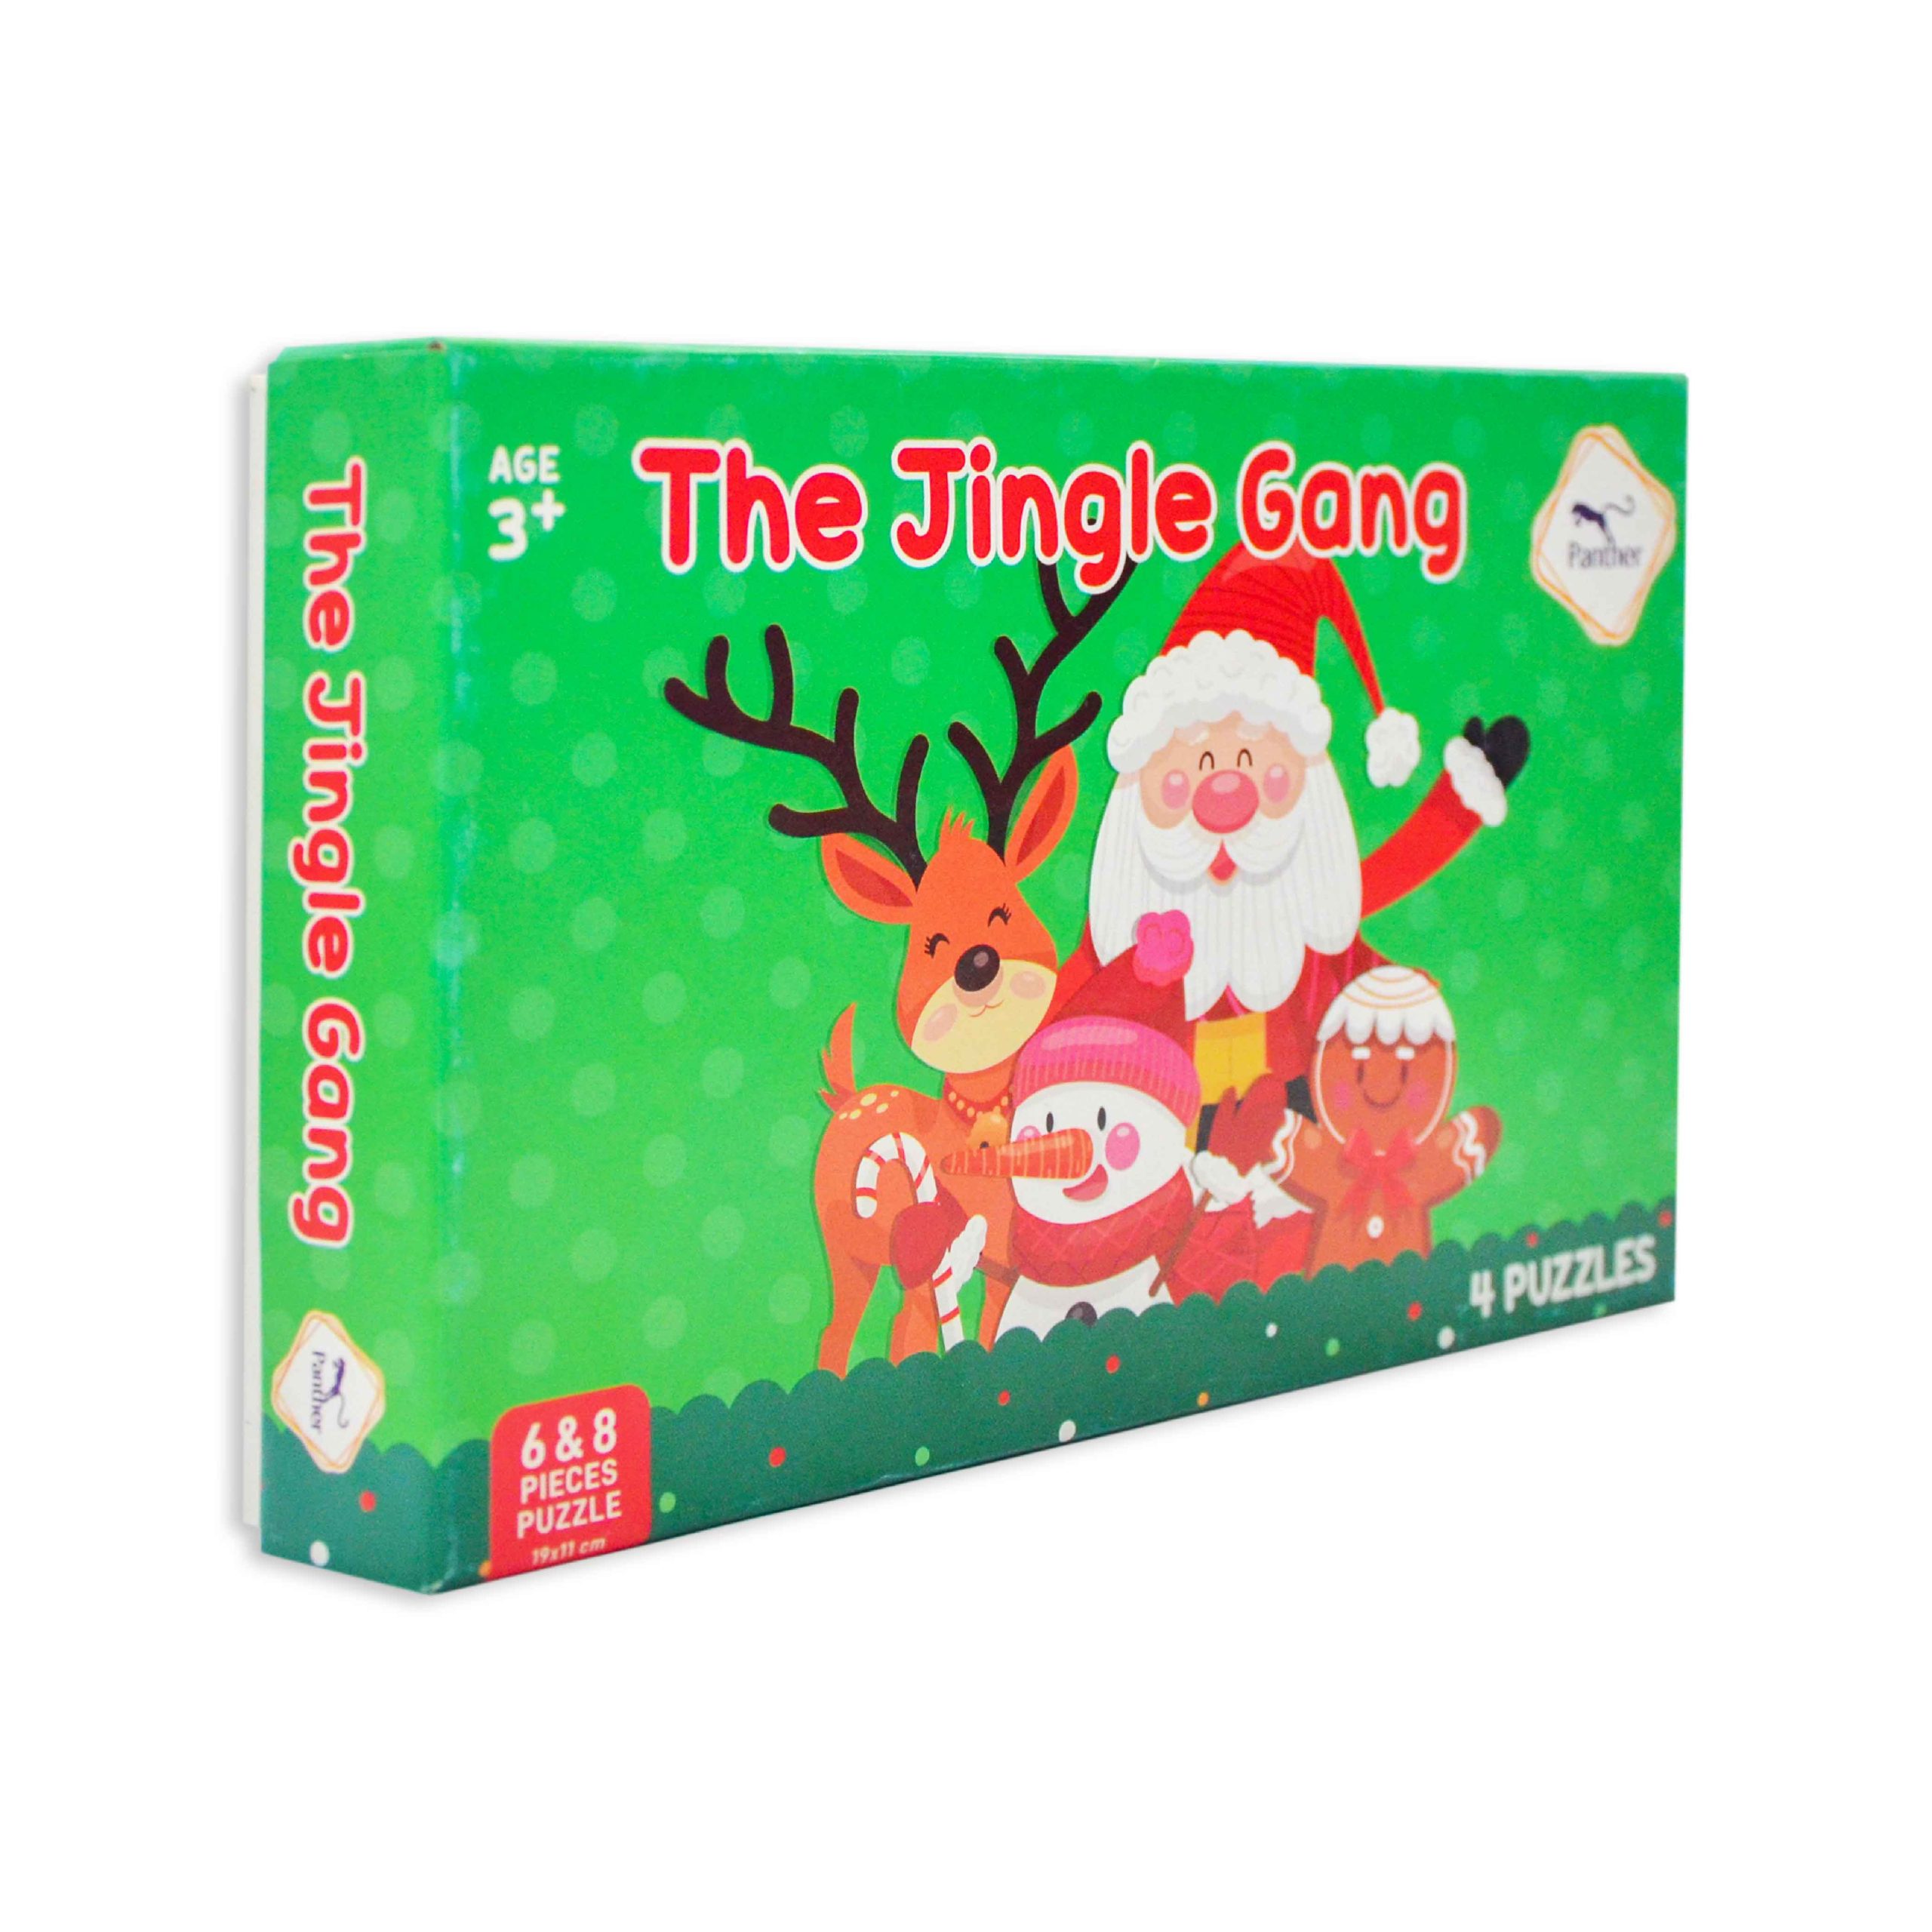 TY7283 The Jingle Gang 6 8 pcs Puzzle 01 scaled